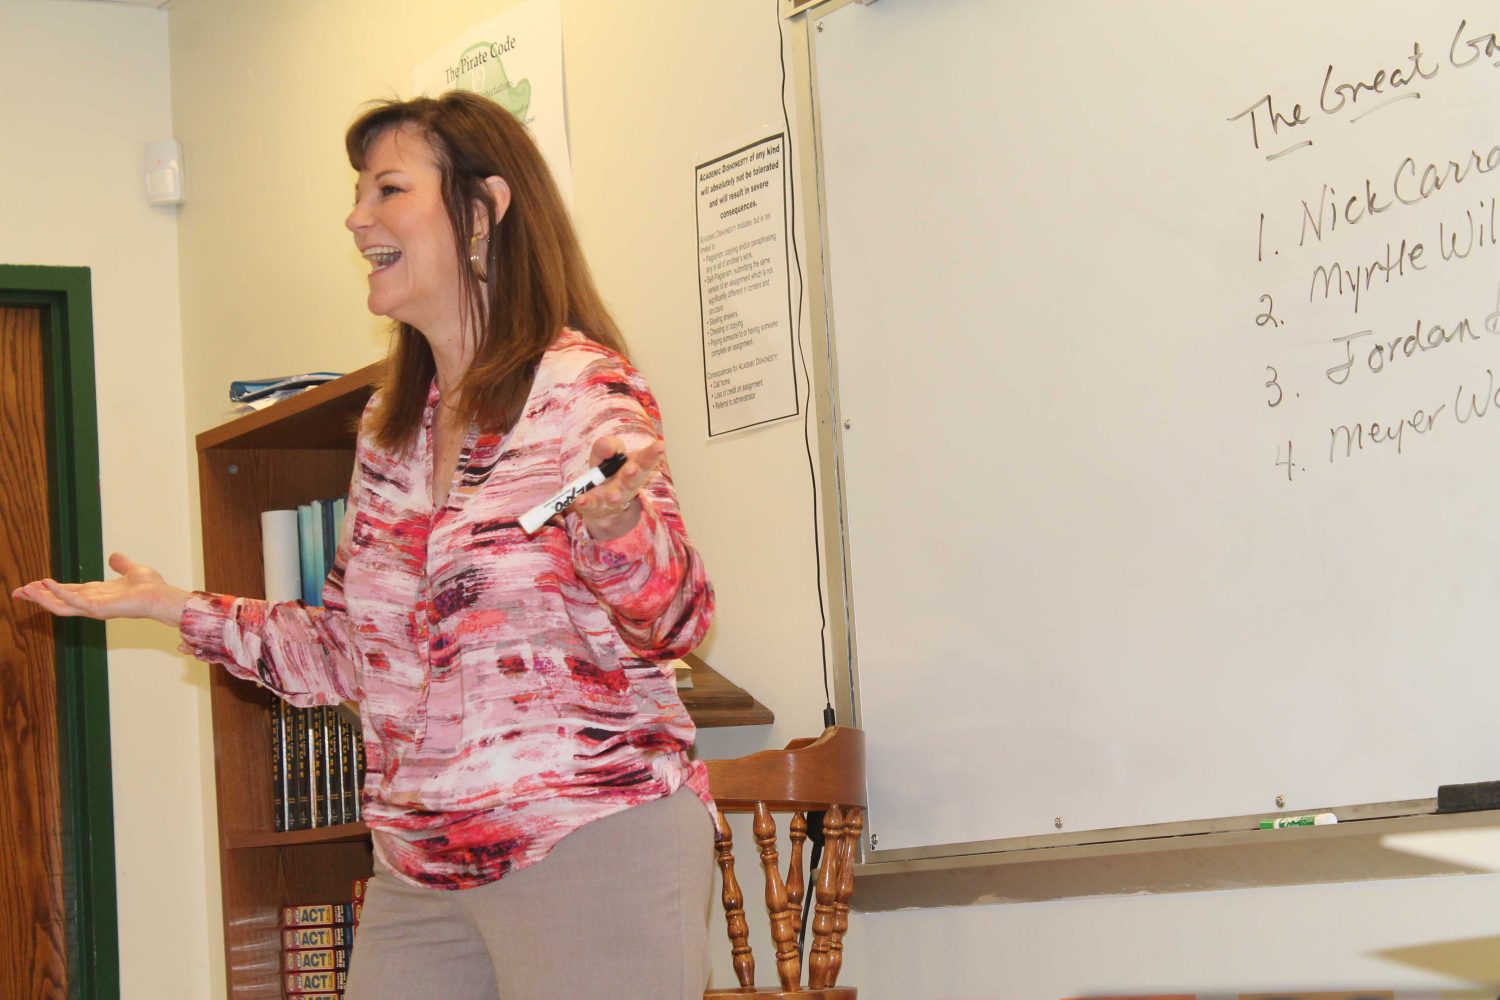 Mrs. Hahn retires from teaching after 27 years